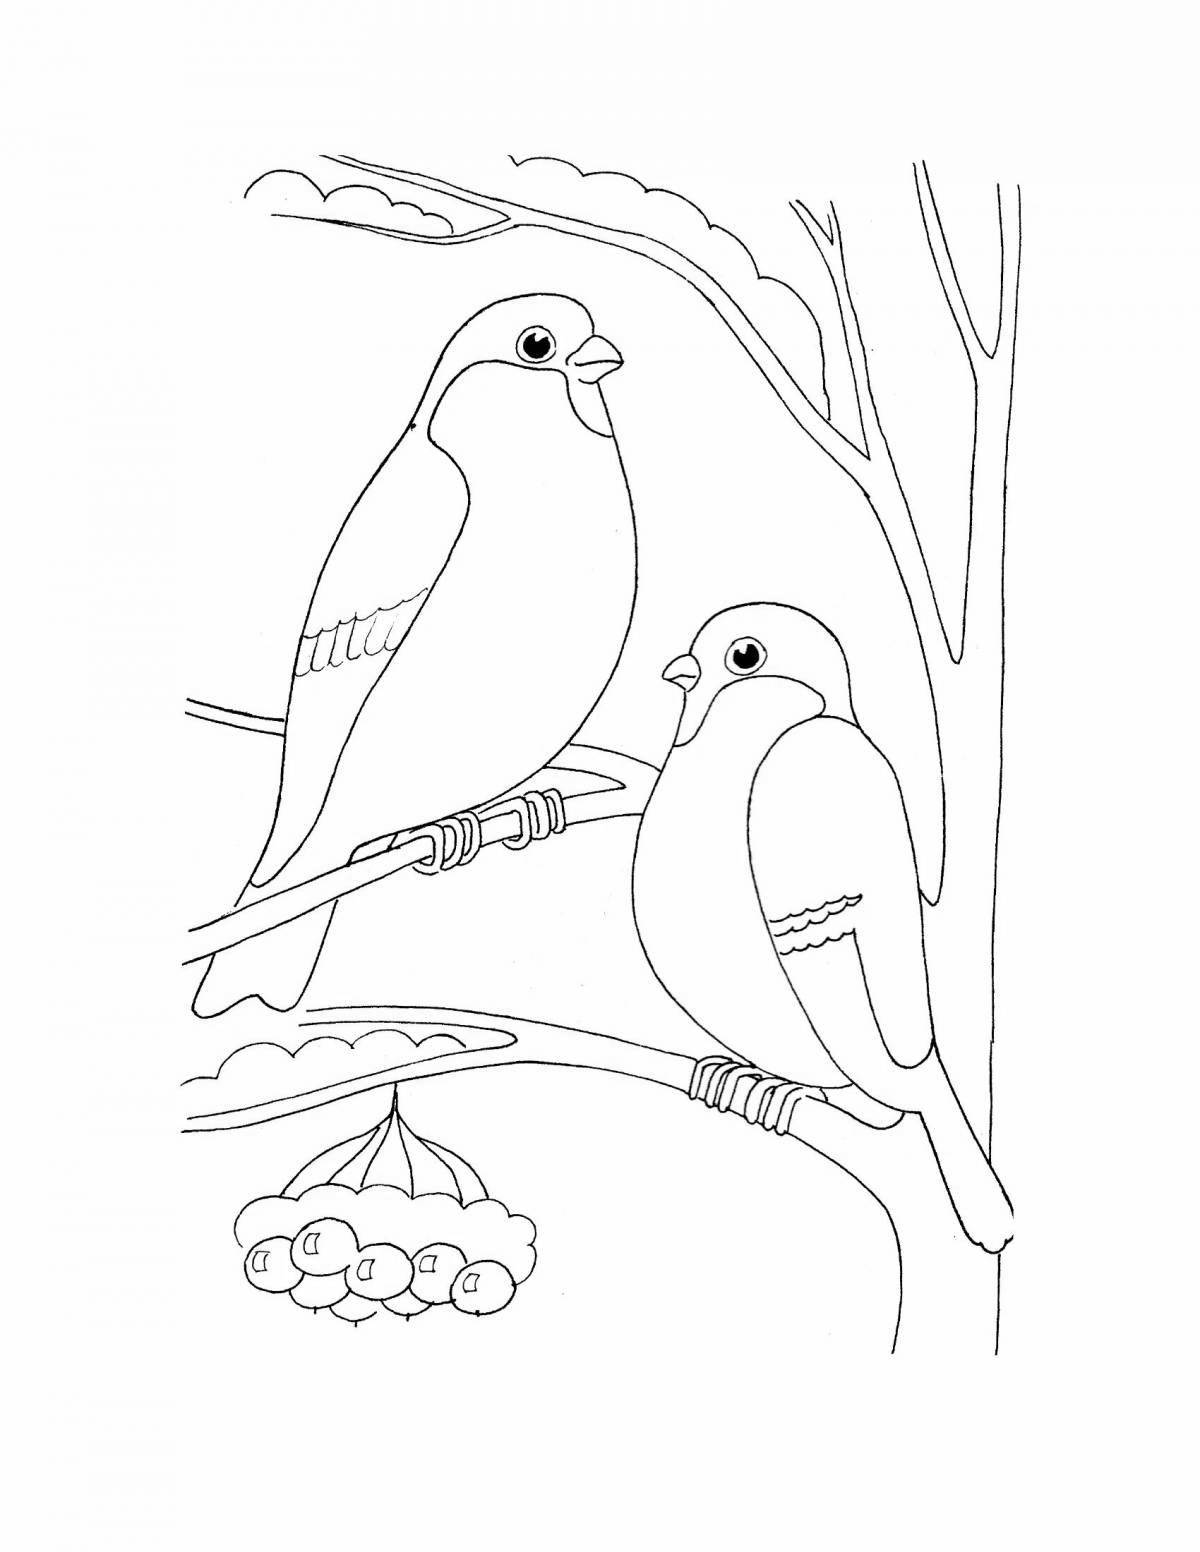 Impressive coloring book of wintering birds for children 2-3 years old